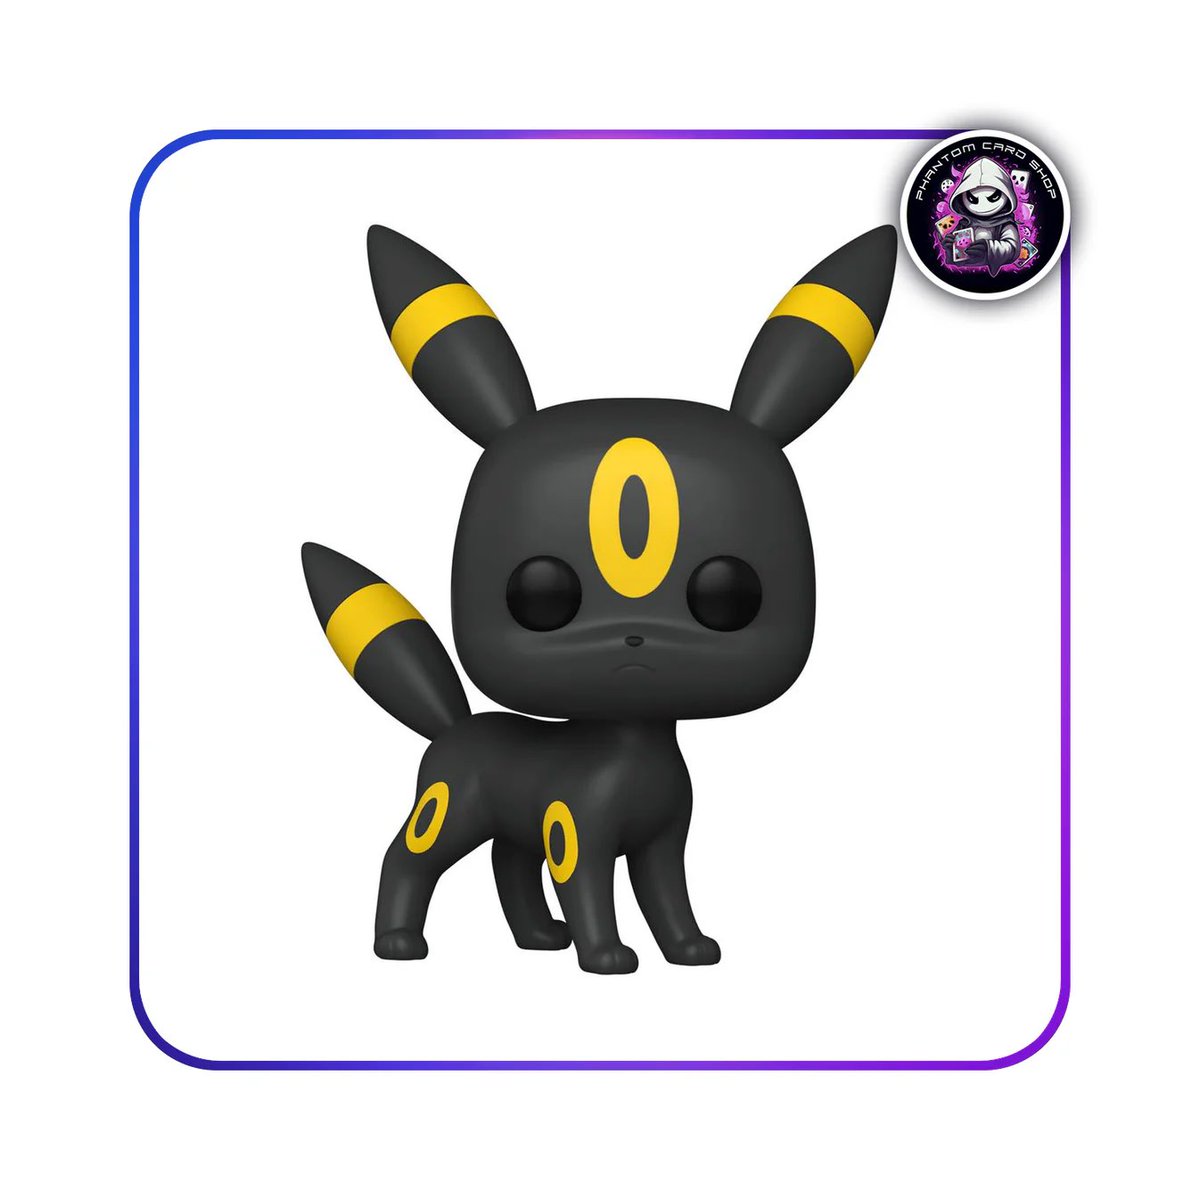 Woke up to a ton of new followers, thank you all! 🫶 To celebrate, the next 5 people who purchase anything on the shop, I’m throwing in a FREE Funko PoP! Umbreon in your package! 🎉 phantomcsrdshop.com #pokemon #pokemontcg